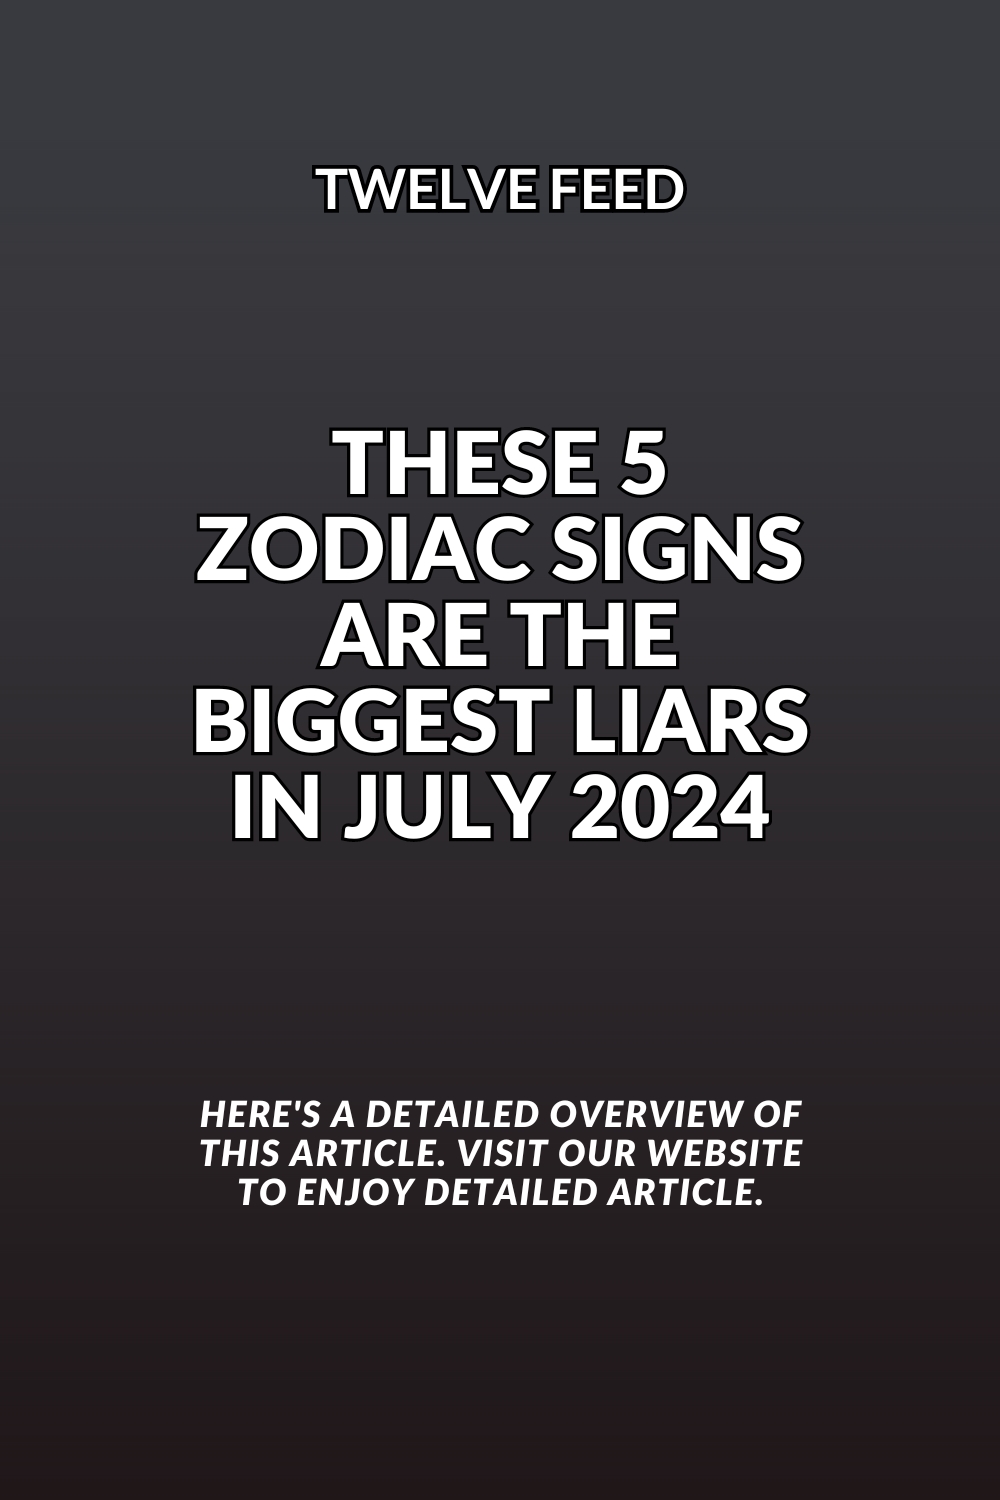 These 5 Zodiac Signs Are The Biggest Liars In July 2024